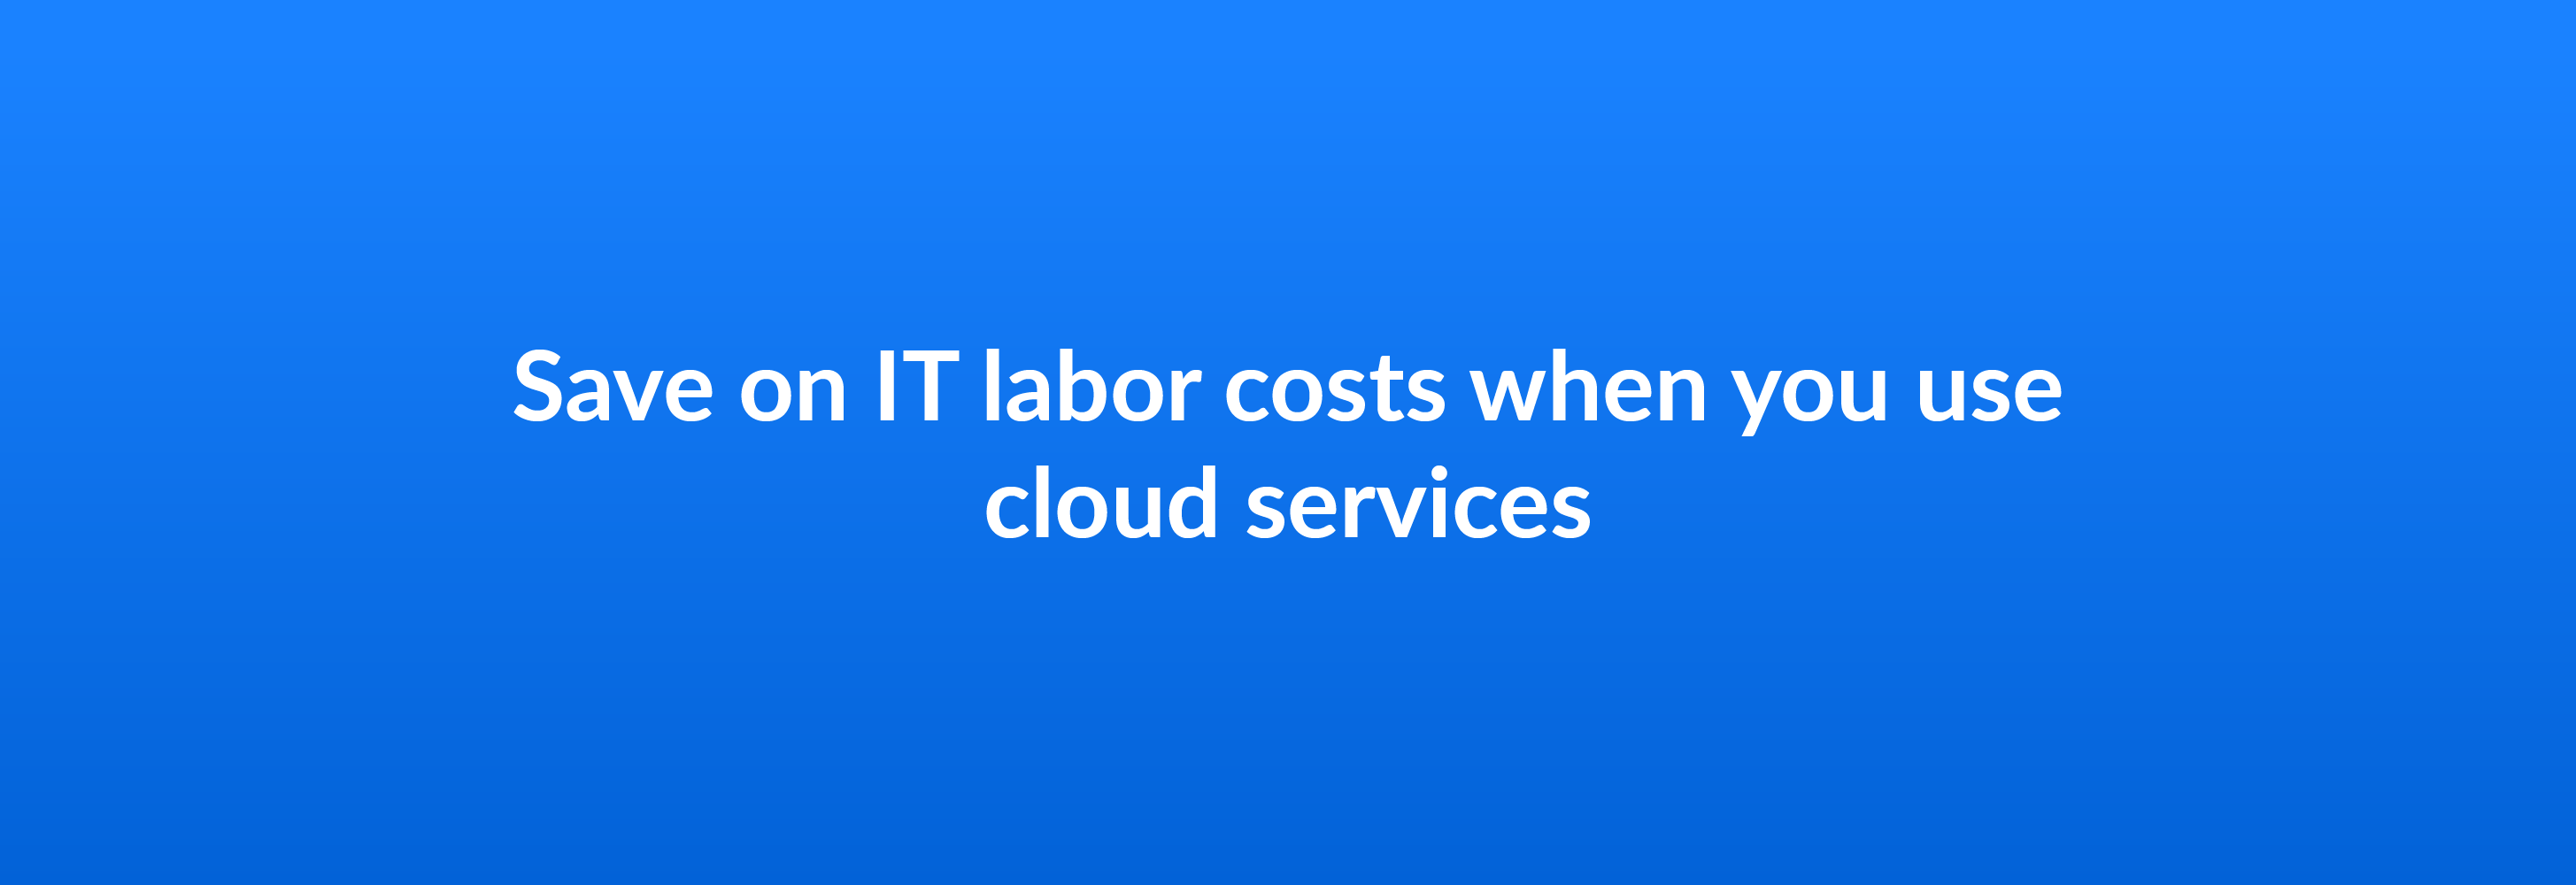 Save on IT labor costs when you use cloud services